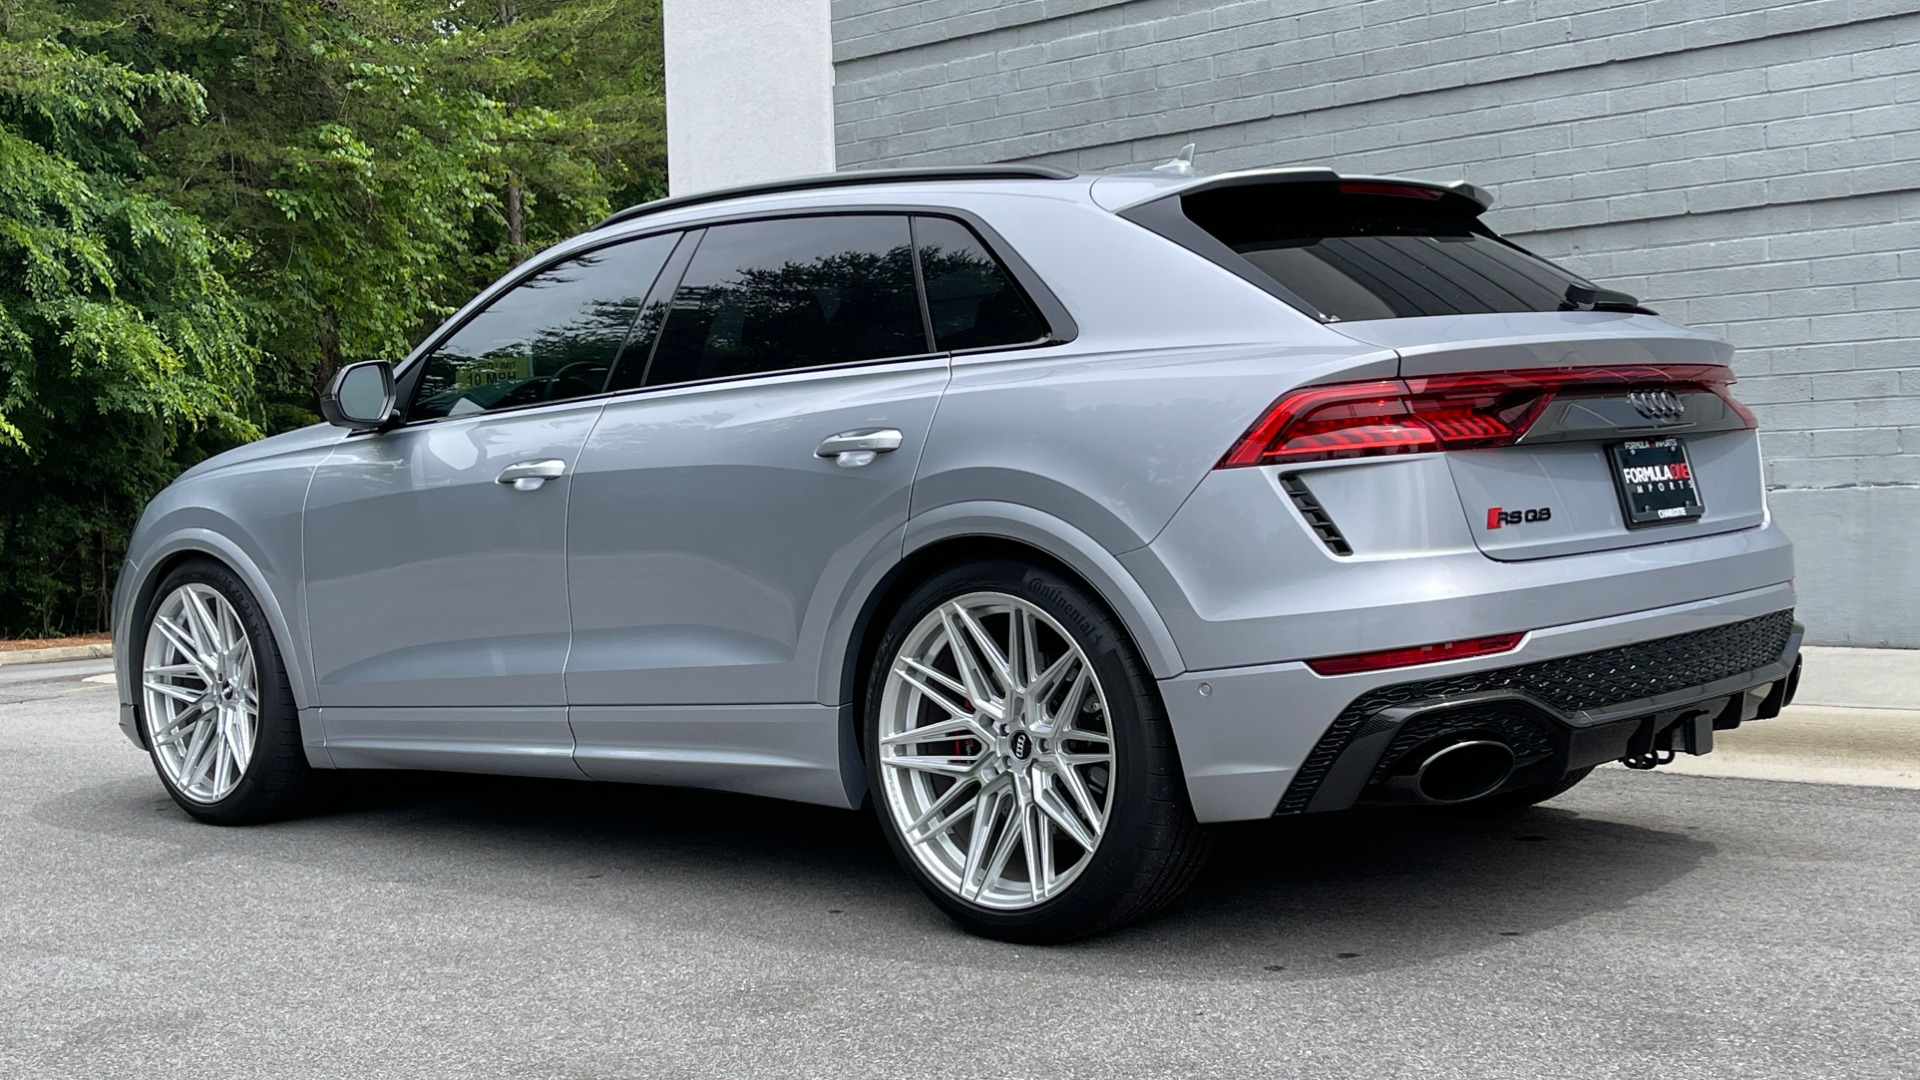 Used 2021 Audi RS Q8 4.0 TFSA QUATTRO / LUX / EXEC / CARBON & BLACK OPTIC / DRVR ASST / TOWING for sale $147,995 at Formula Imports in Charlotte NC 28227 7